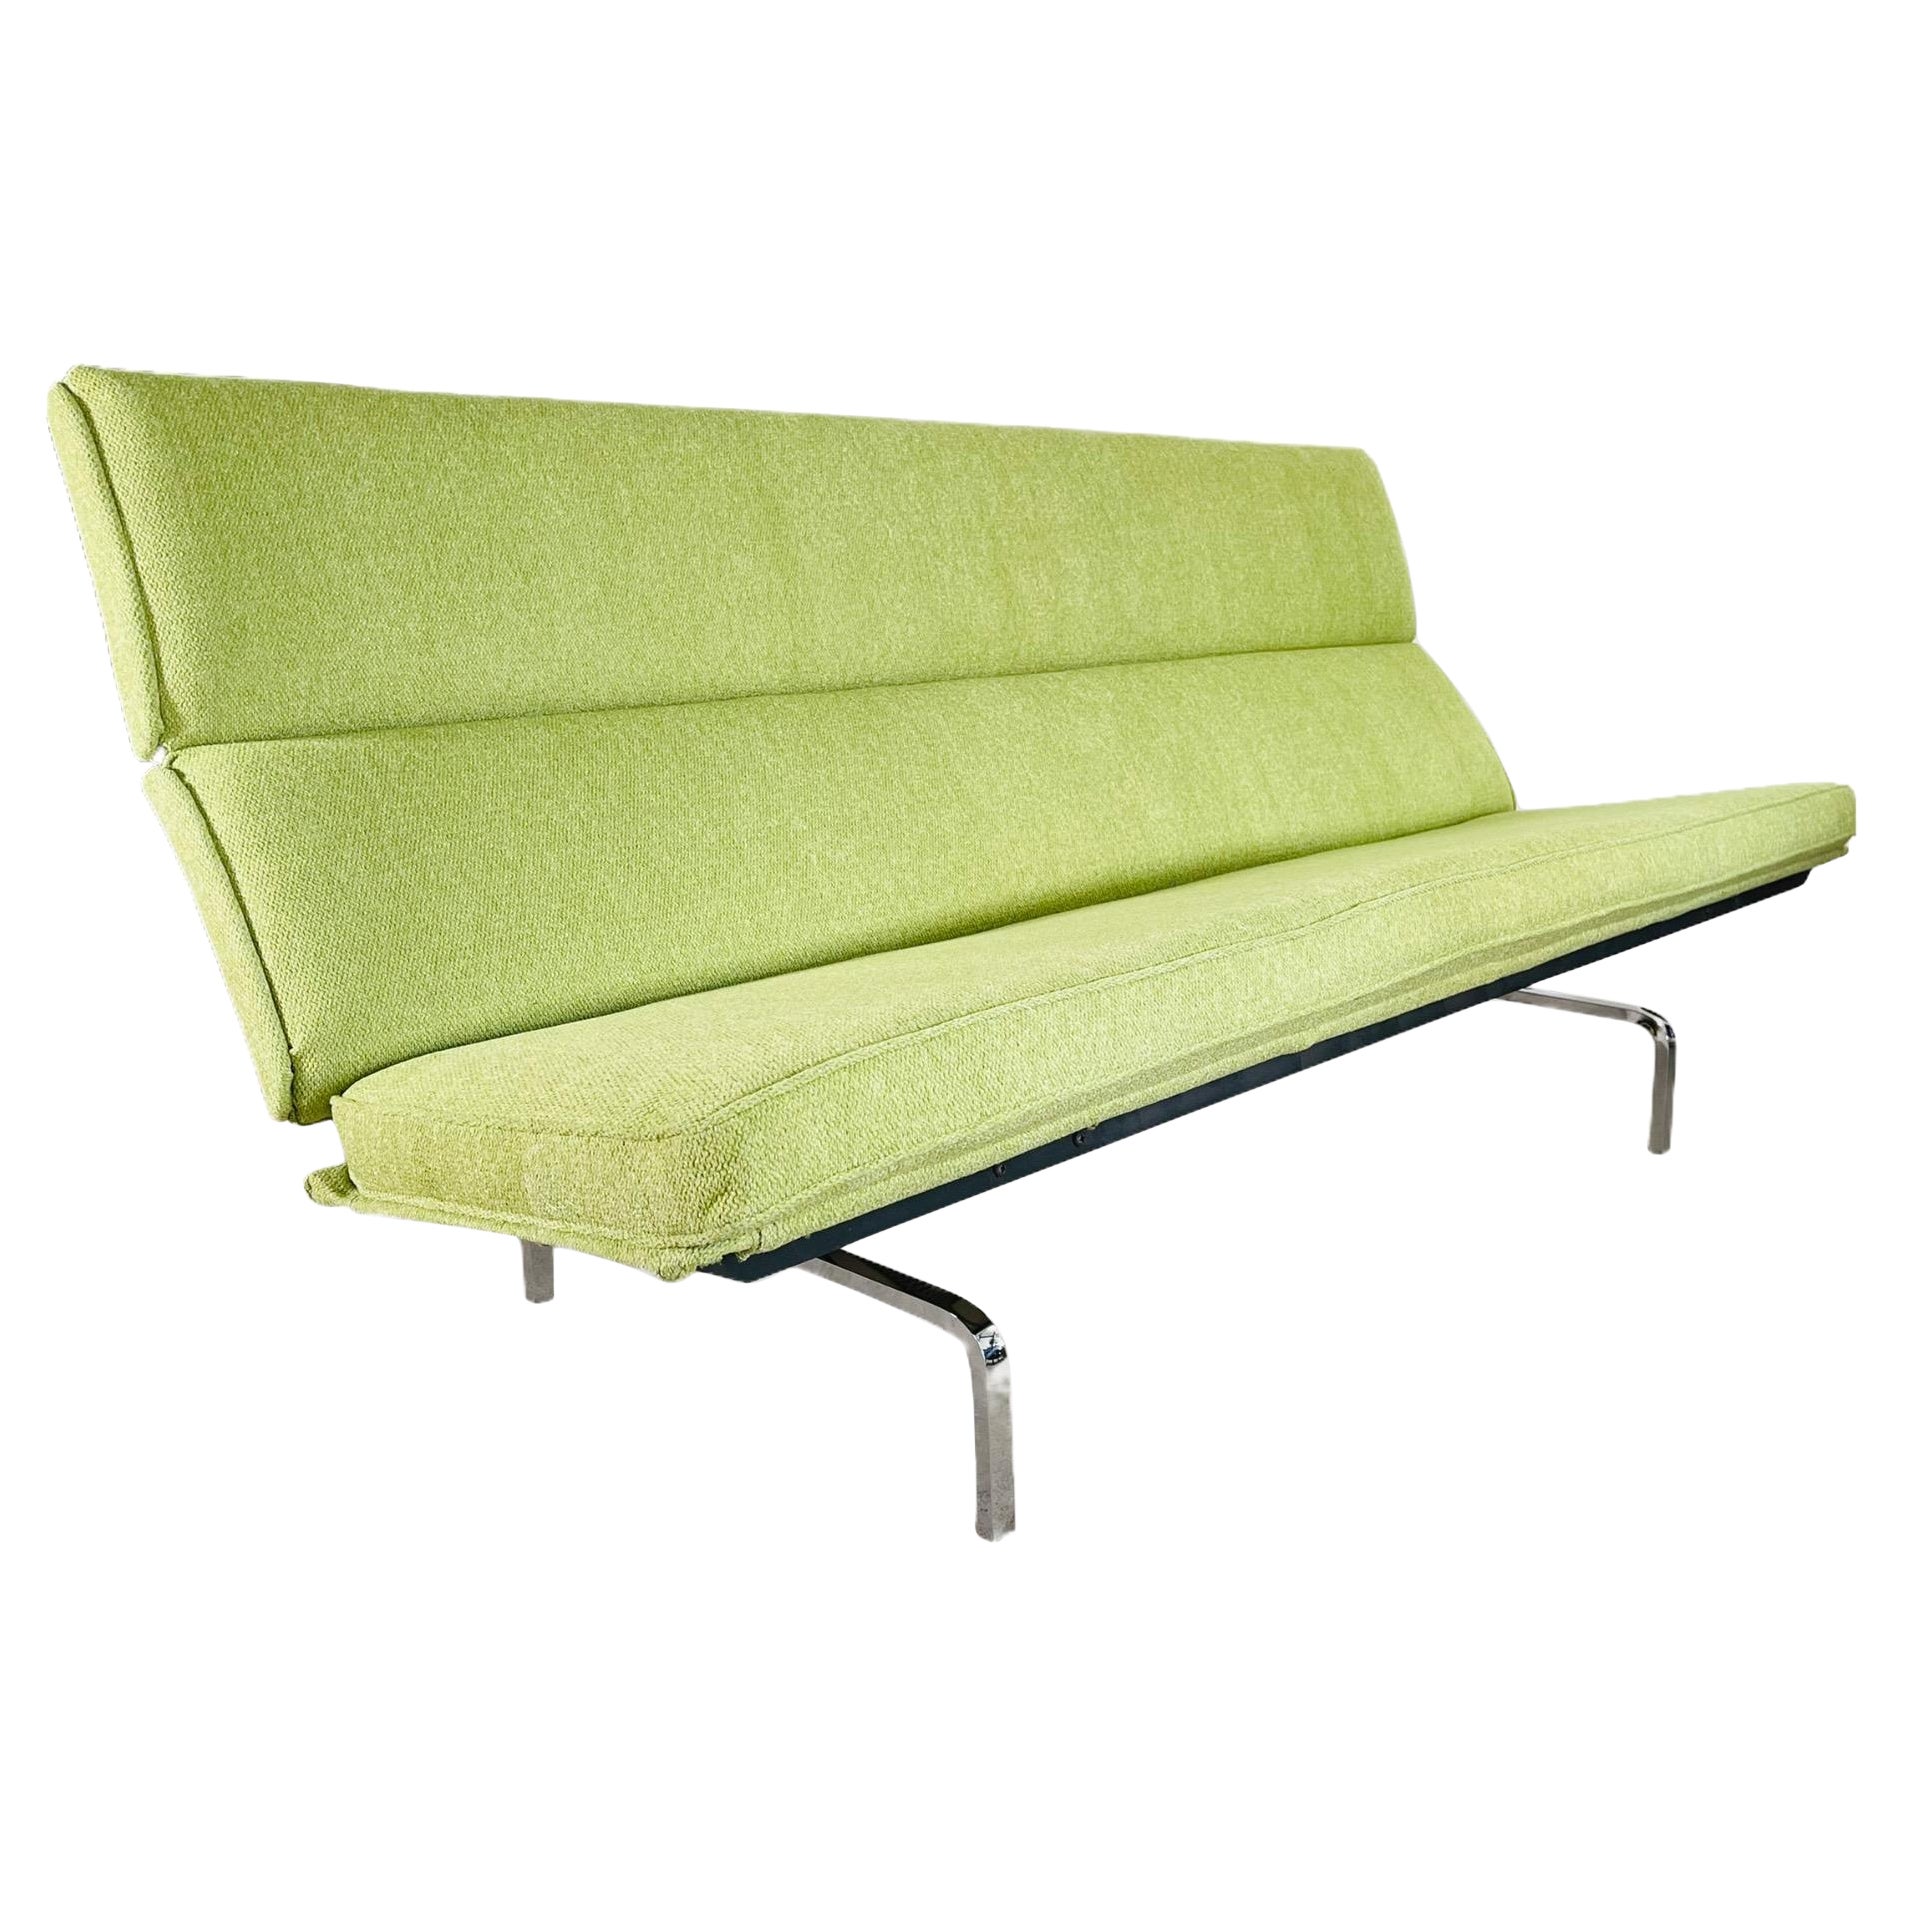 Charles Eames for Herman Miller Compact Sofa